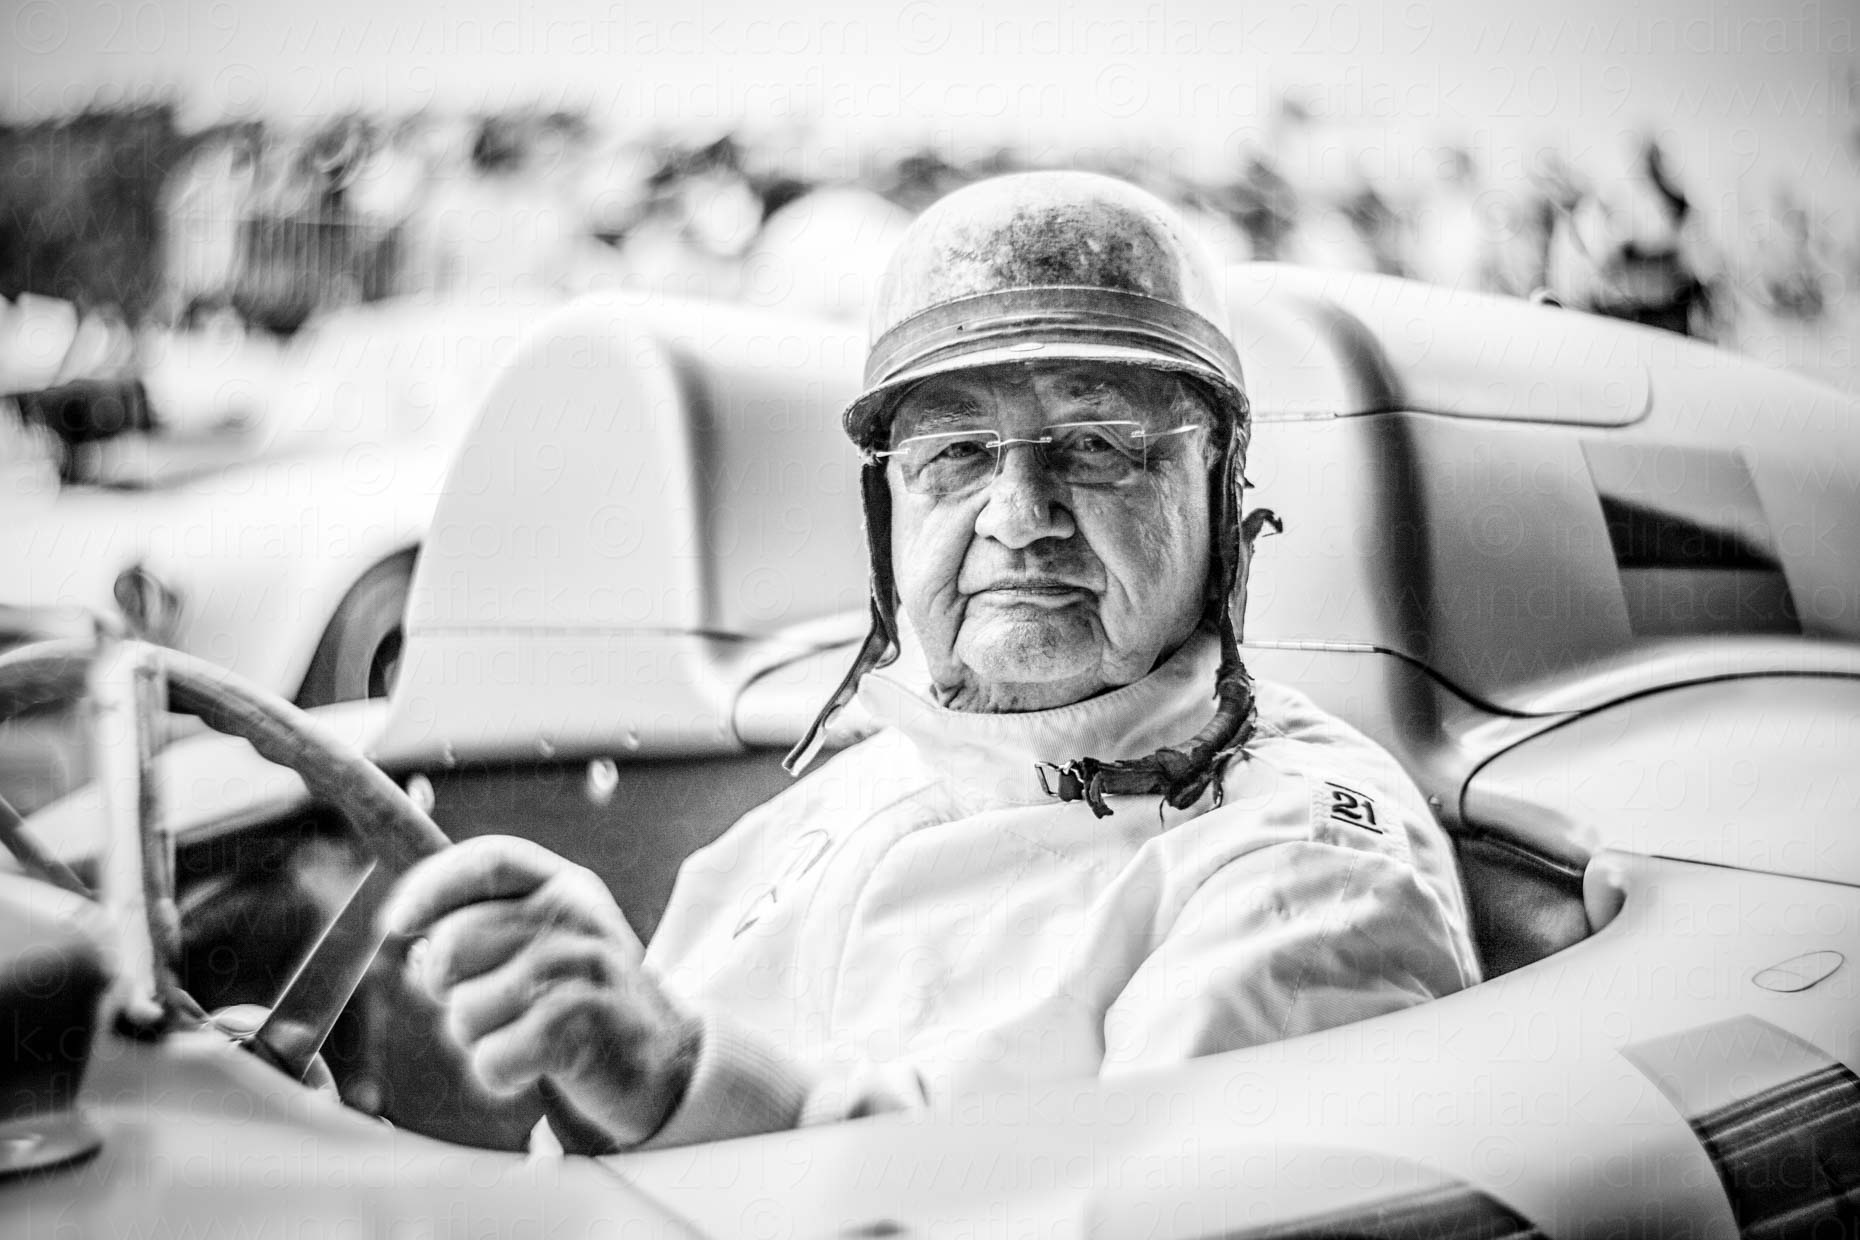 Hans Hermann portrait taken by Indira Flack Photography at Goodwood Festival of Speed